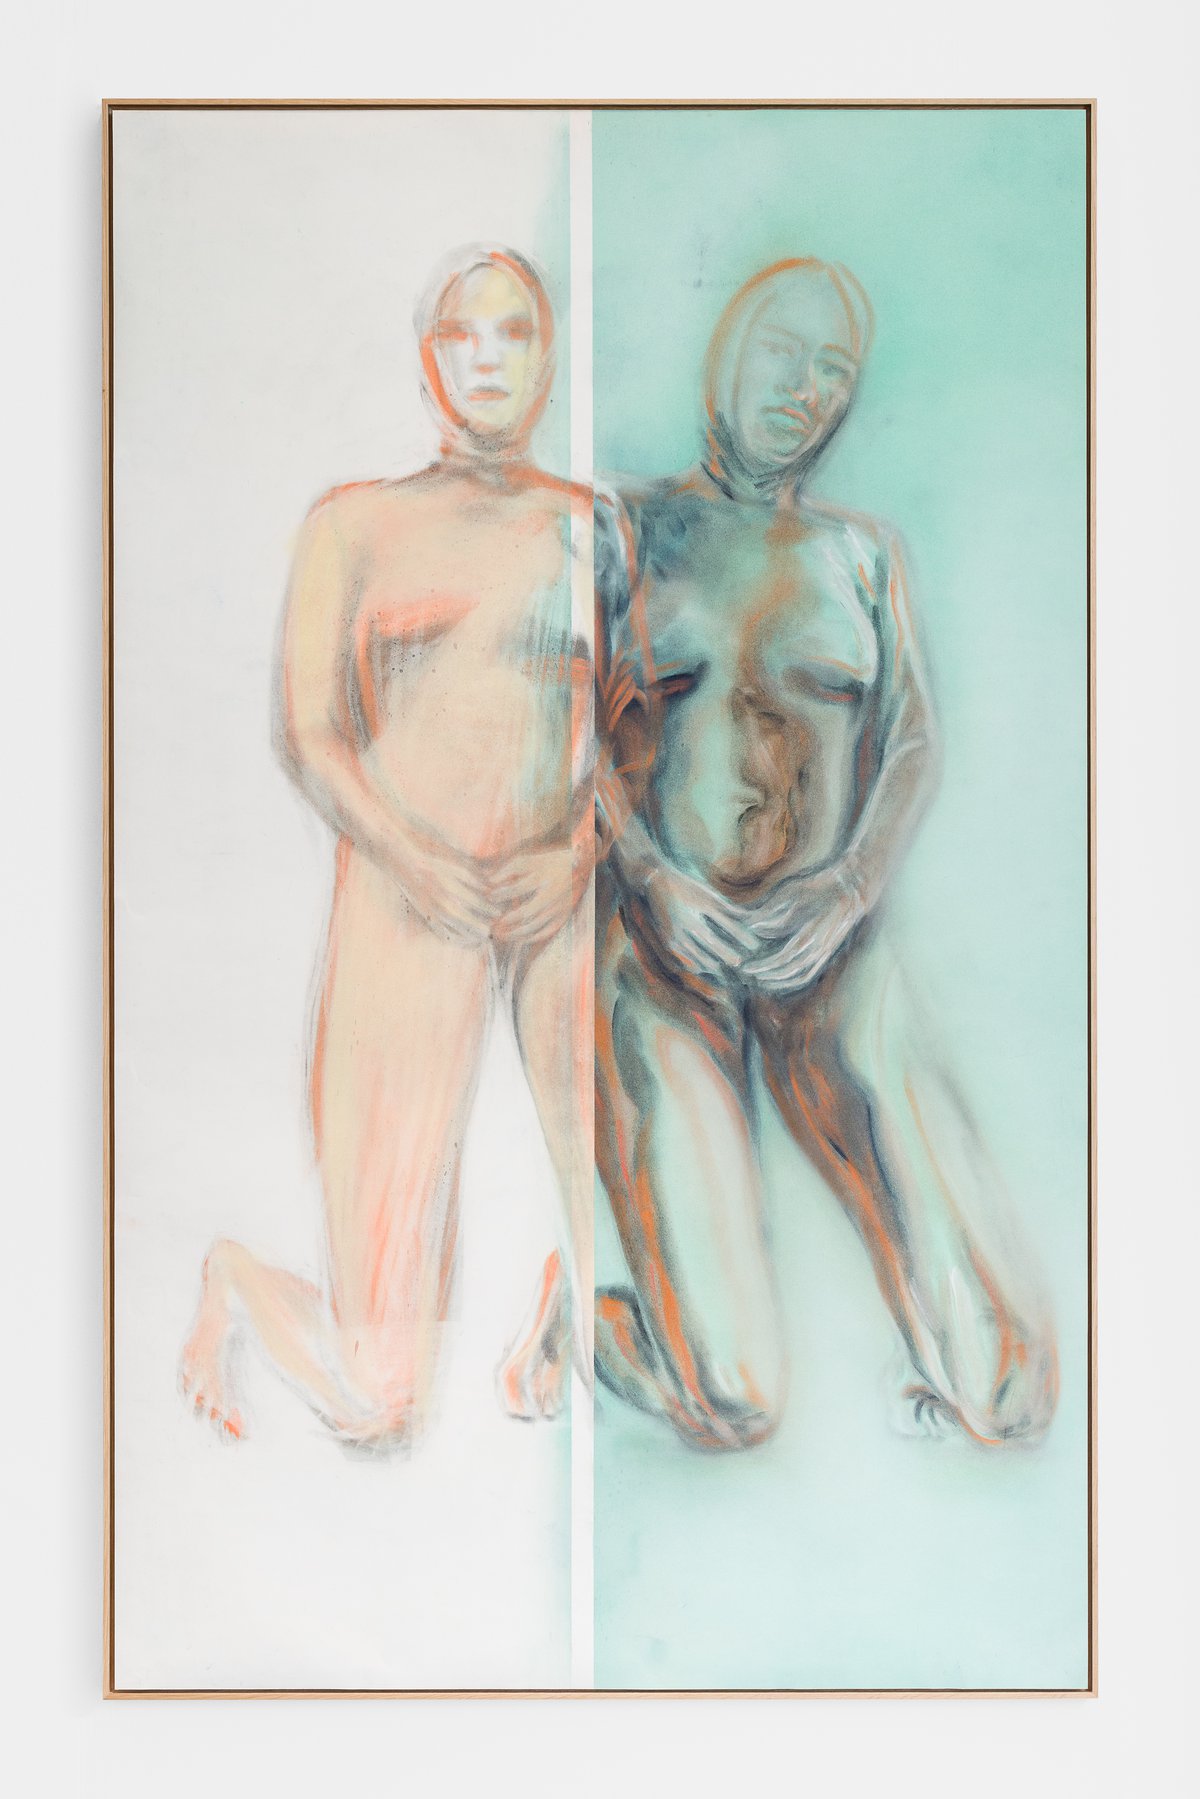 Evelyn PlaschgSelf as an Android, 2021Pigment on Paper181.5 x 112.5 cm (framed)